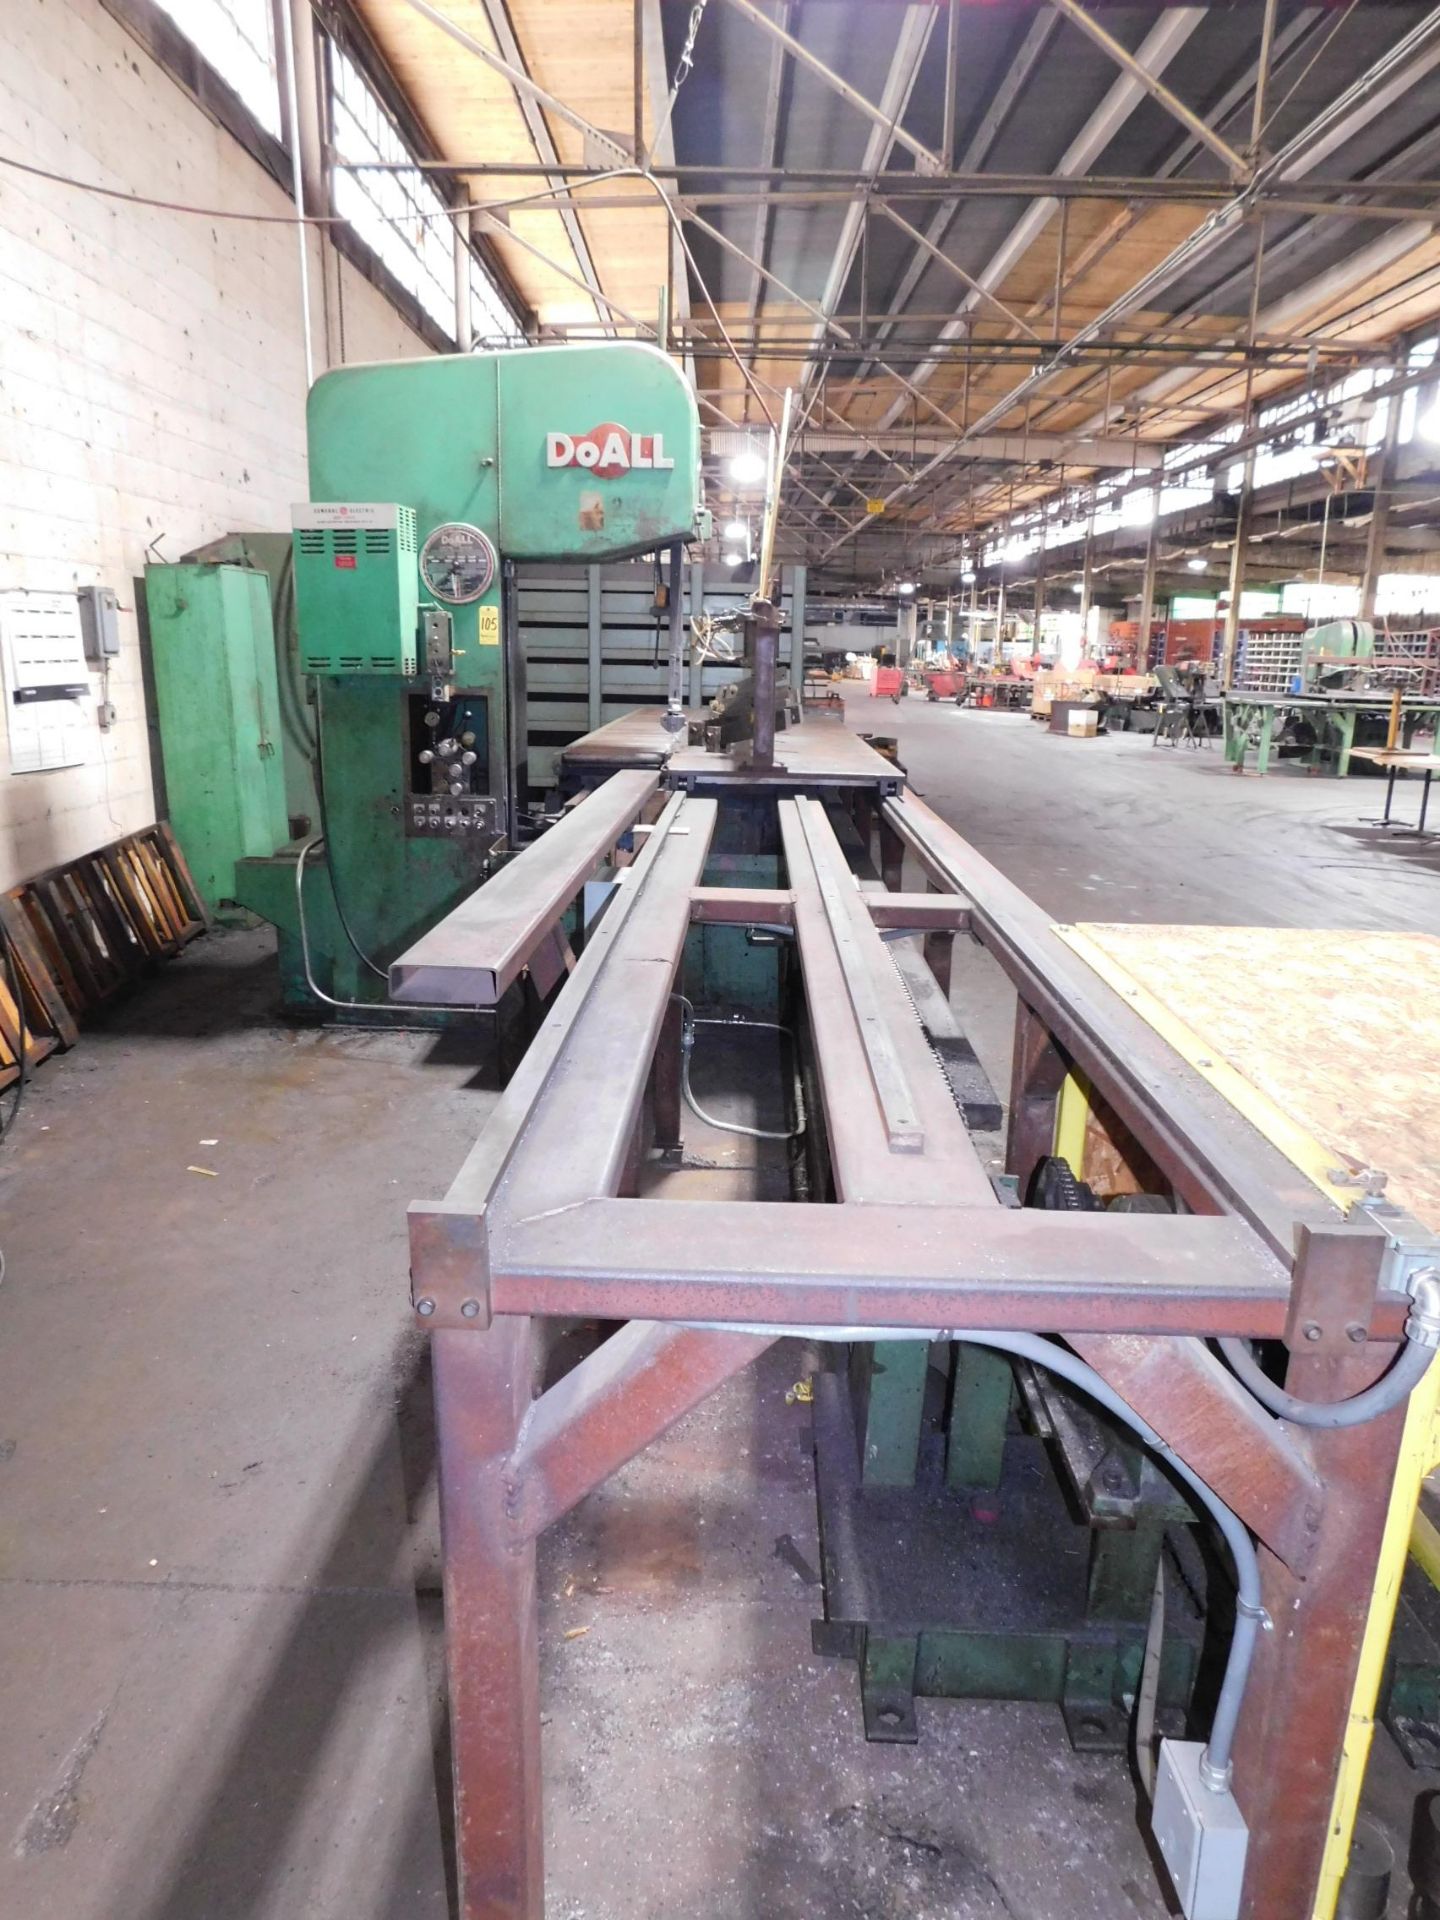 Do-All Model 2630-4 Vertical Plate Saw, s/n 208-68142, 26” Throat, 30” Max. Vertical Height, 34 1/2”